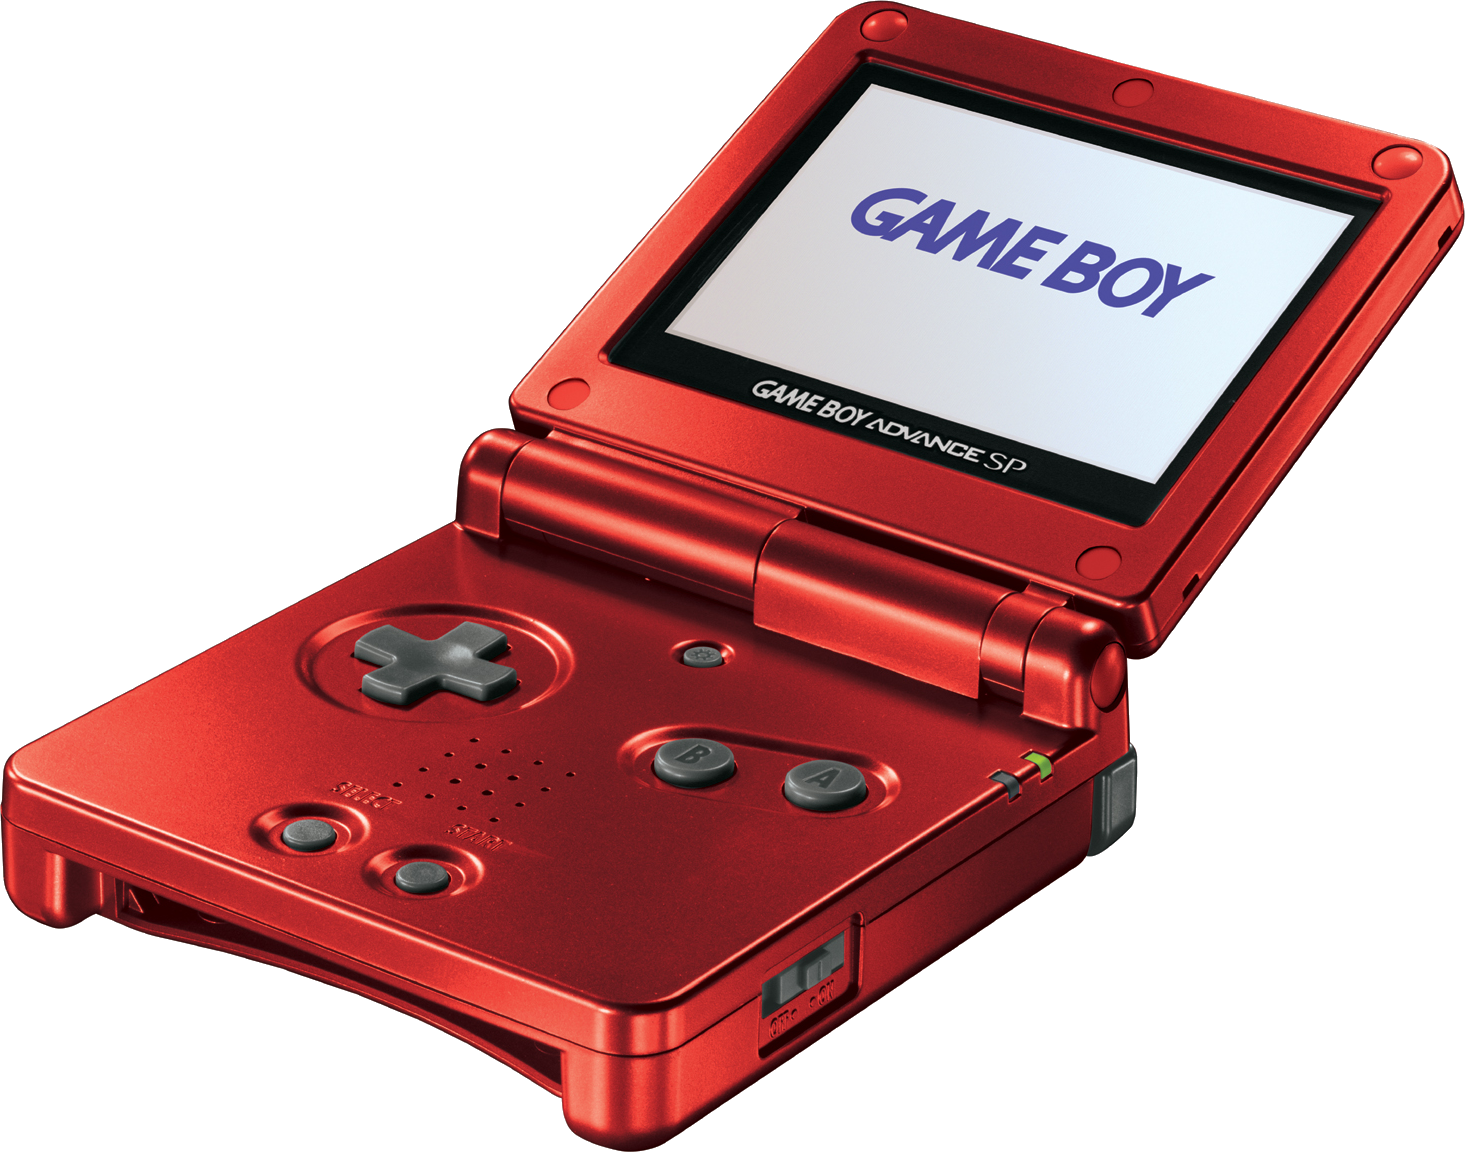 Amazing Game Boy Pictures & Backgrounds